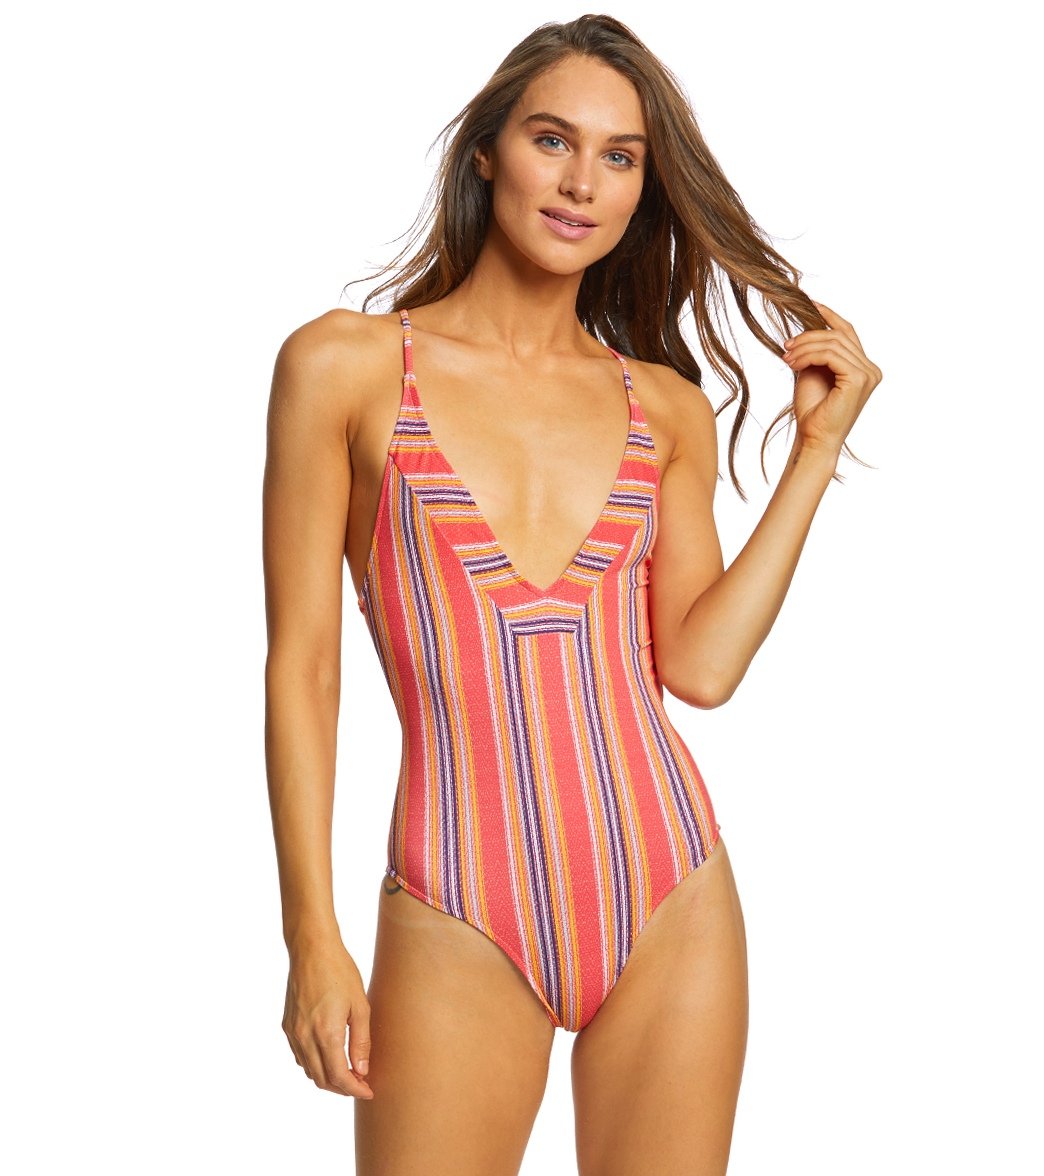 Rip Curl Women's Sedona Cheeky One Piece Swimsuit - Red Xl - Swimoutlet.com